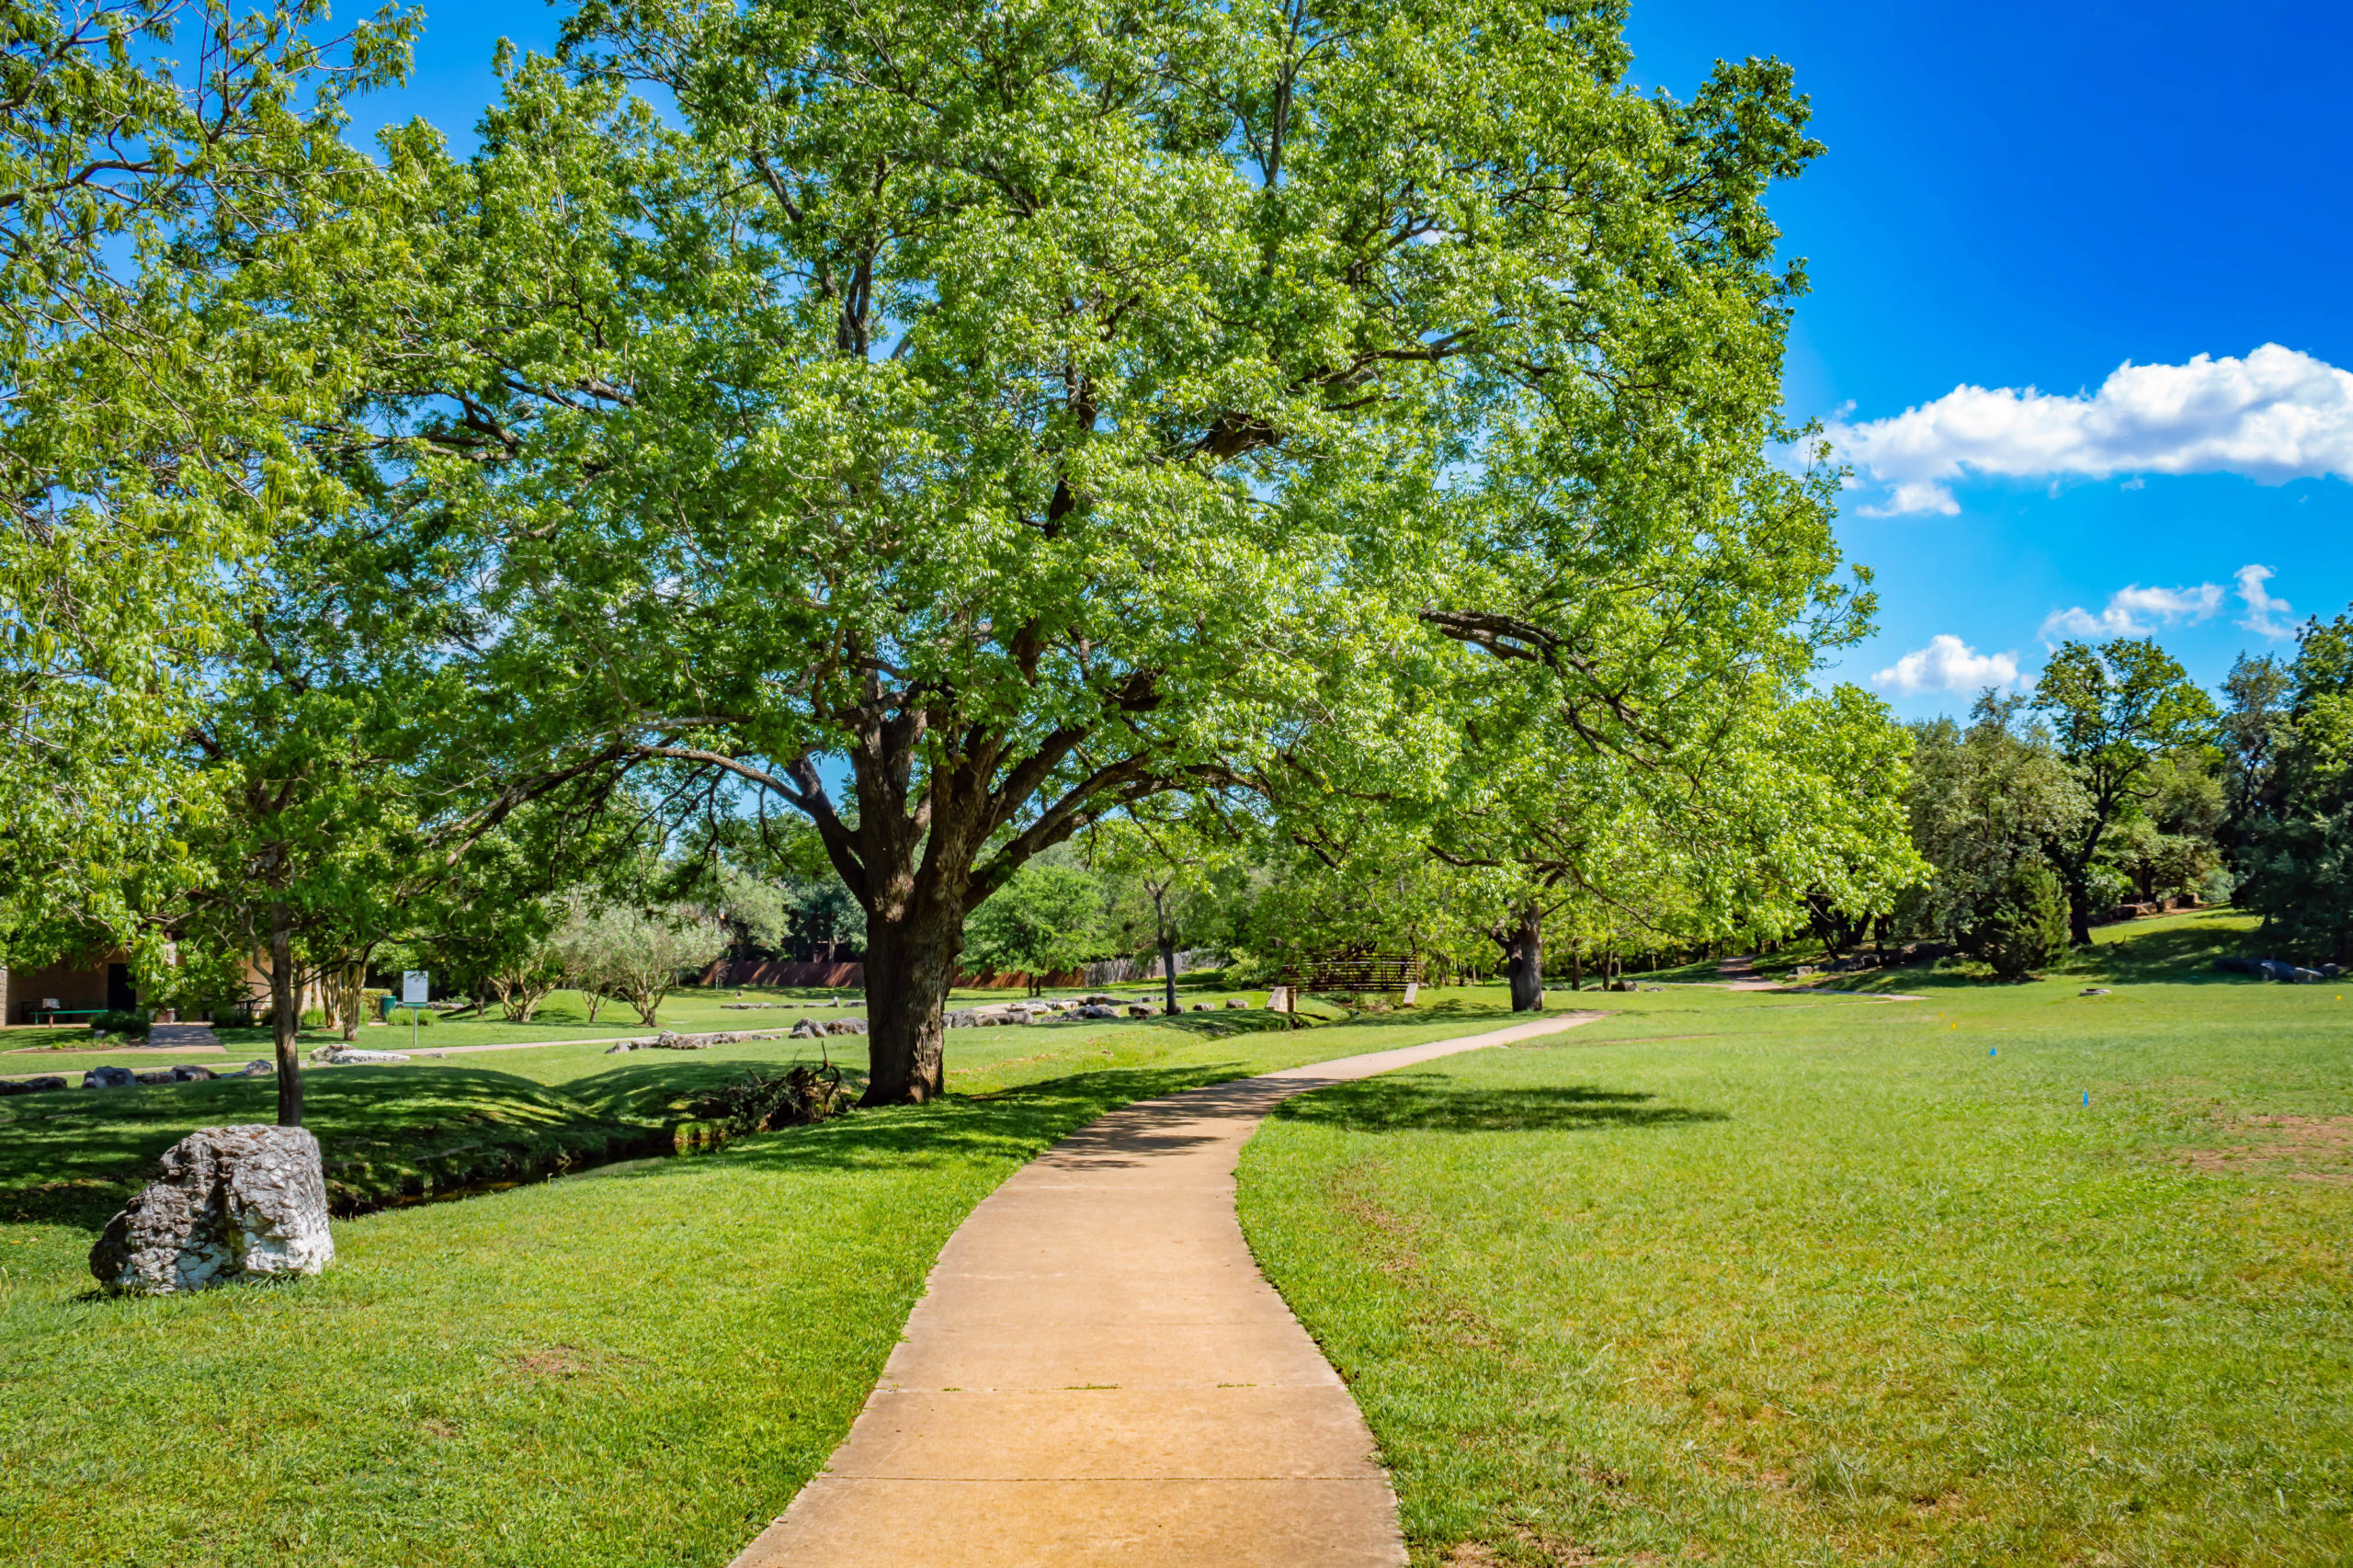 Picture of sidewalk and large tree.